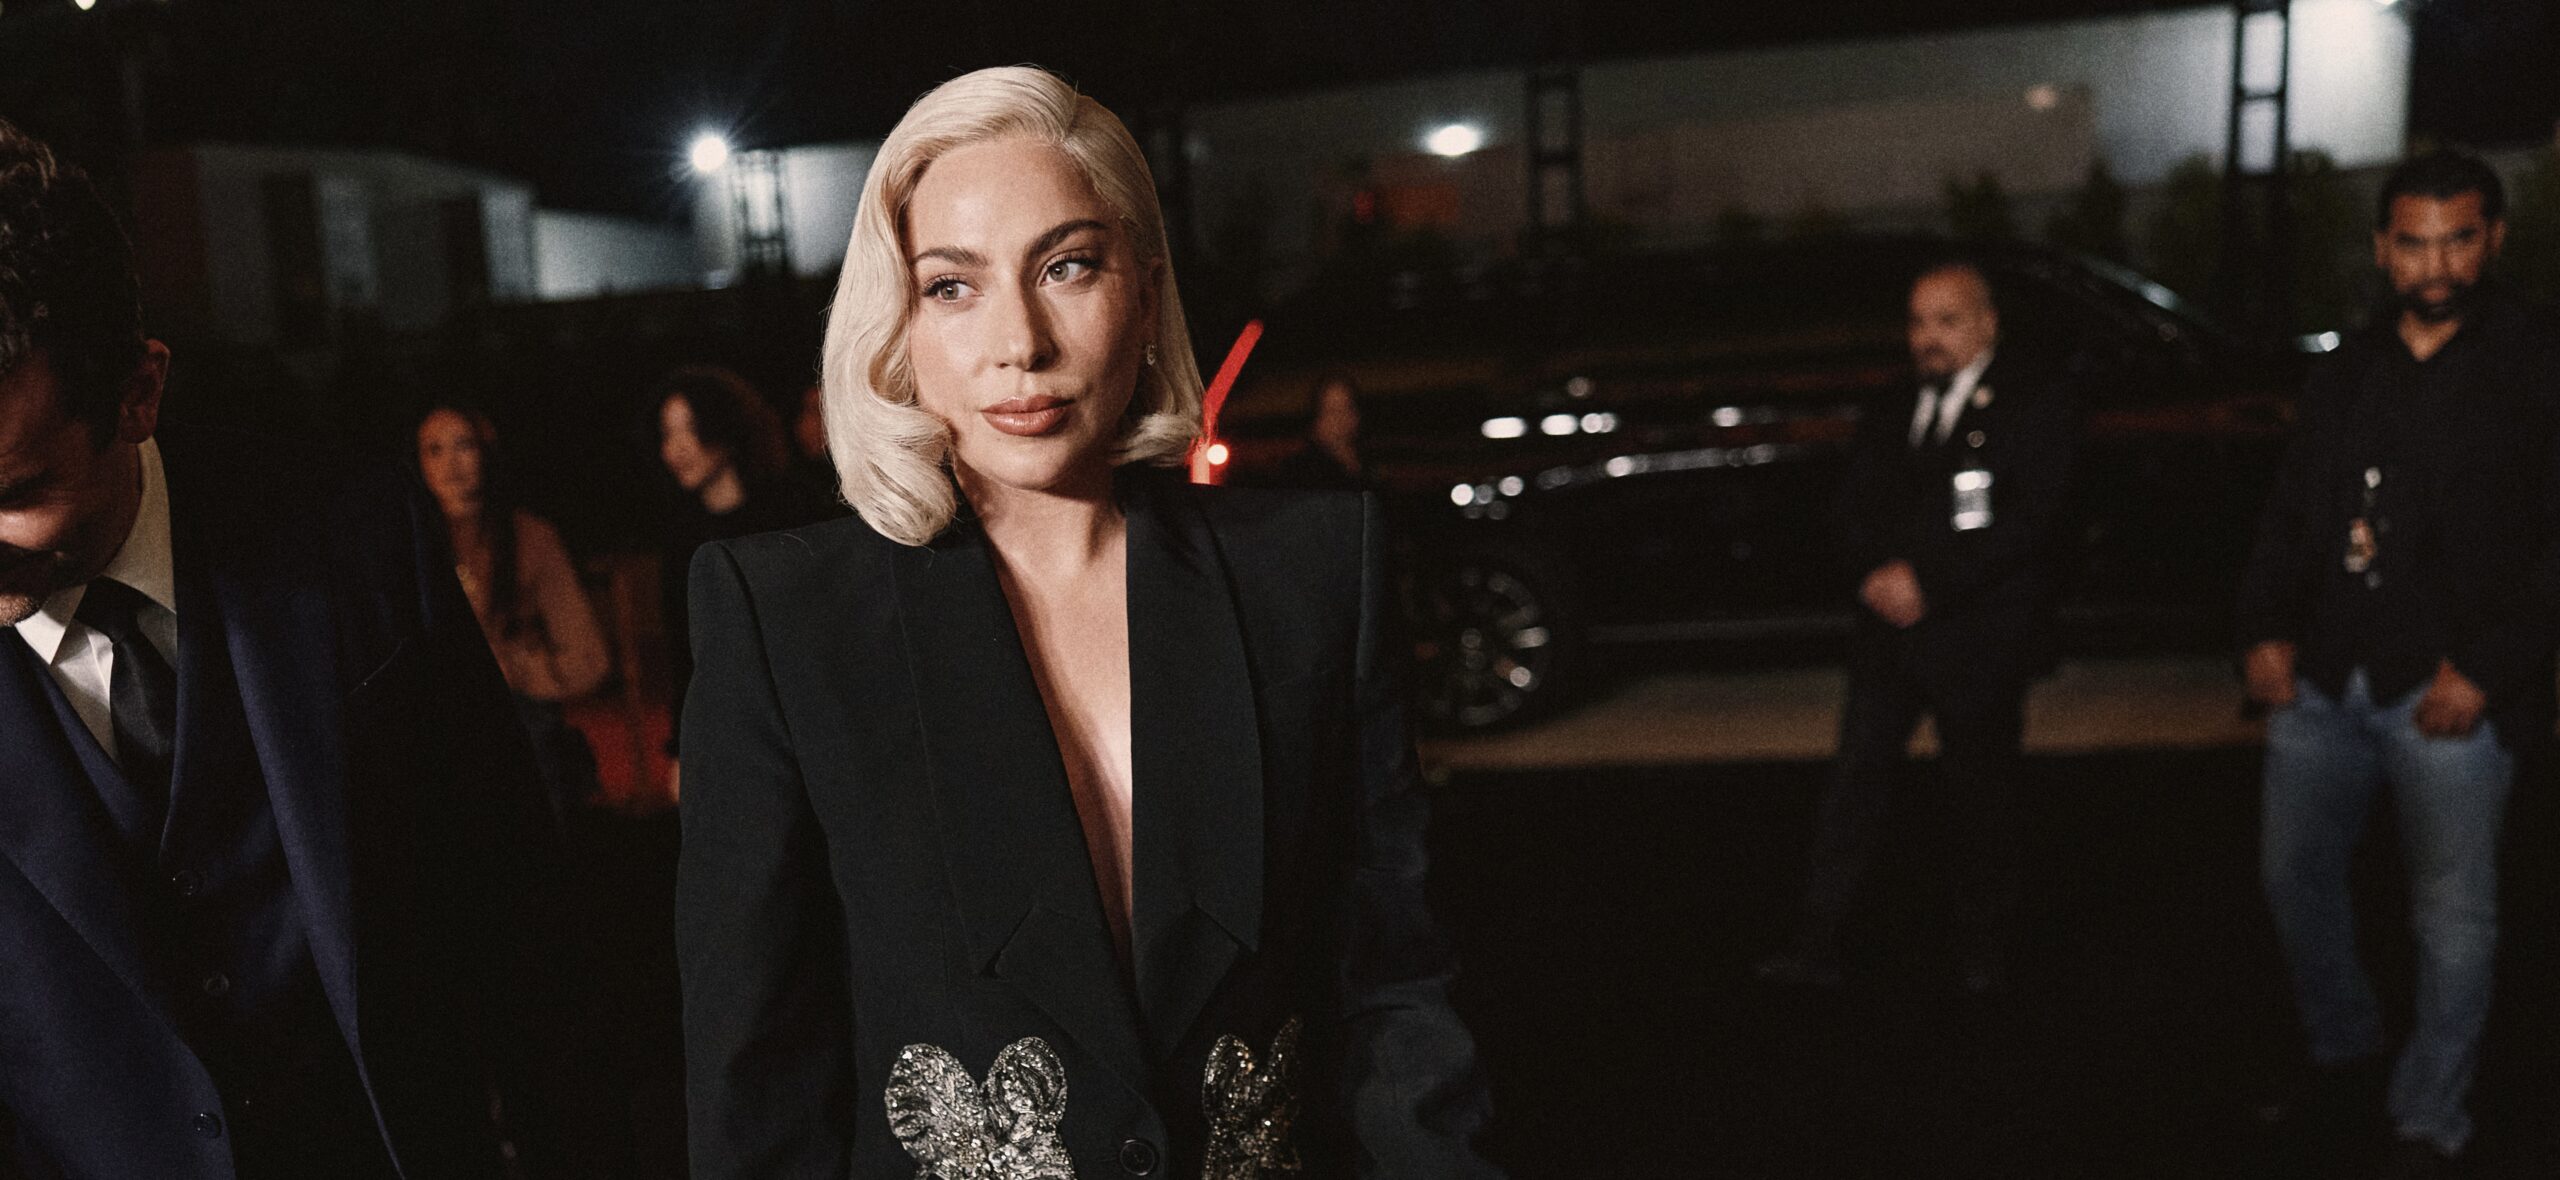 Lady Gaga at the LA special screening of Netflix's 'Maestro', dressed in a black sequined blazer, exuding Hollywood glamour.